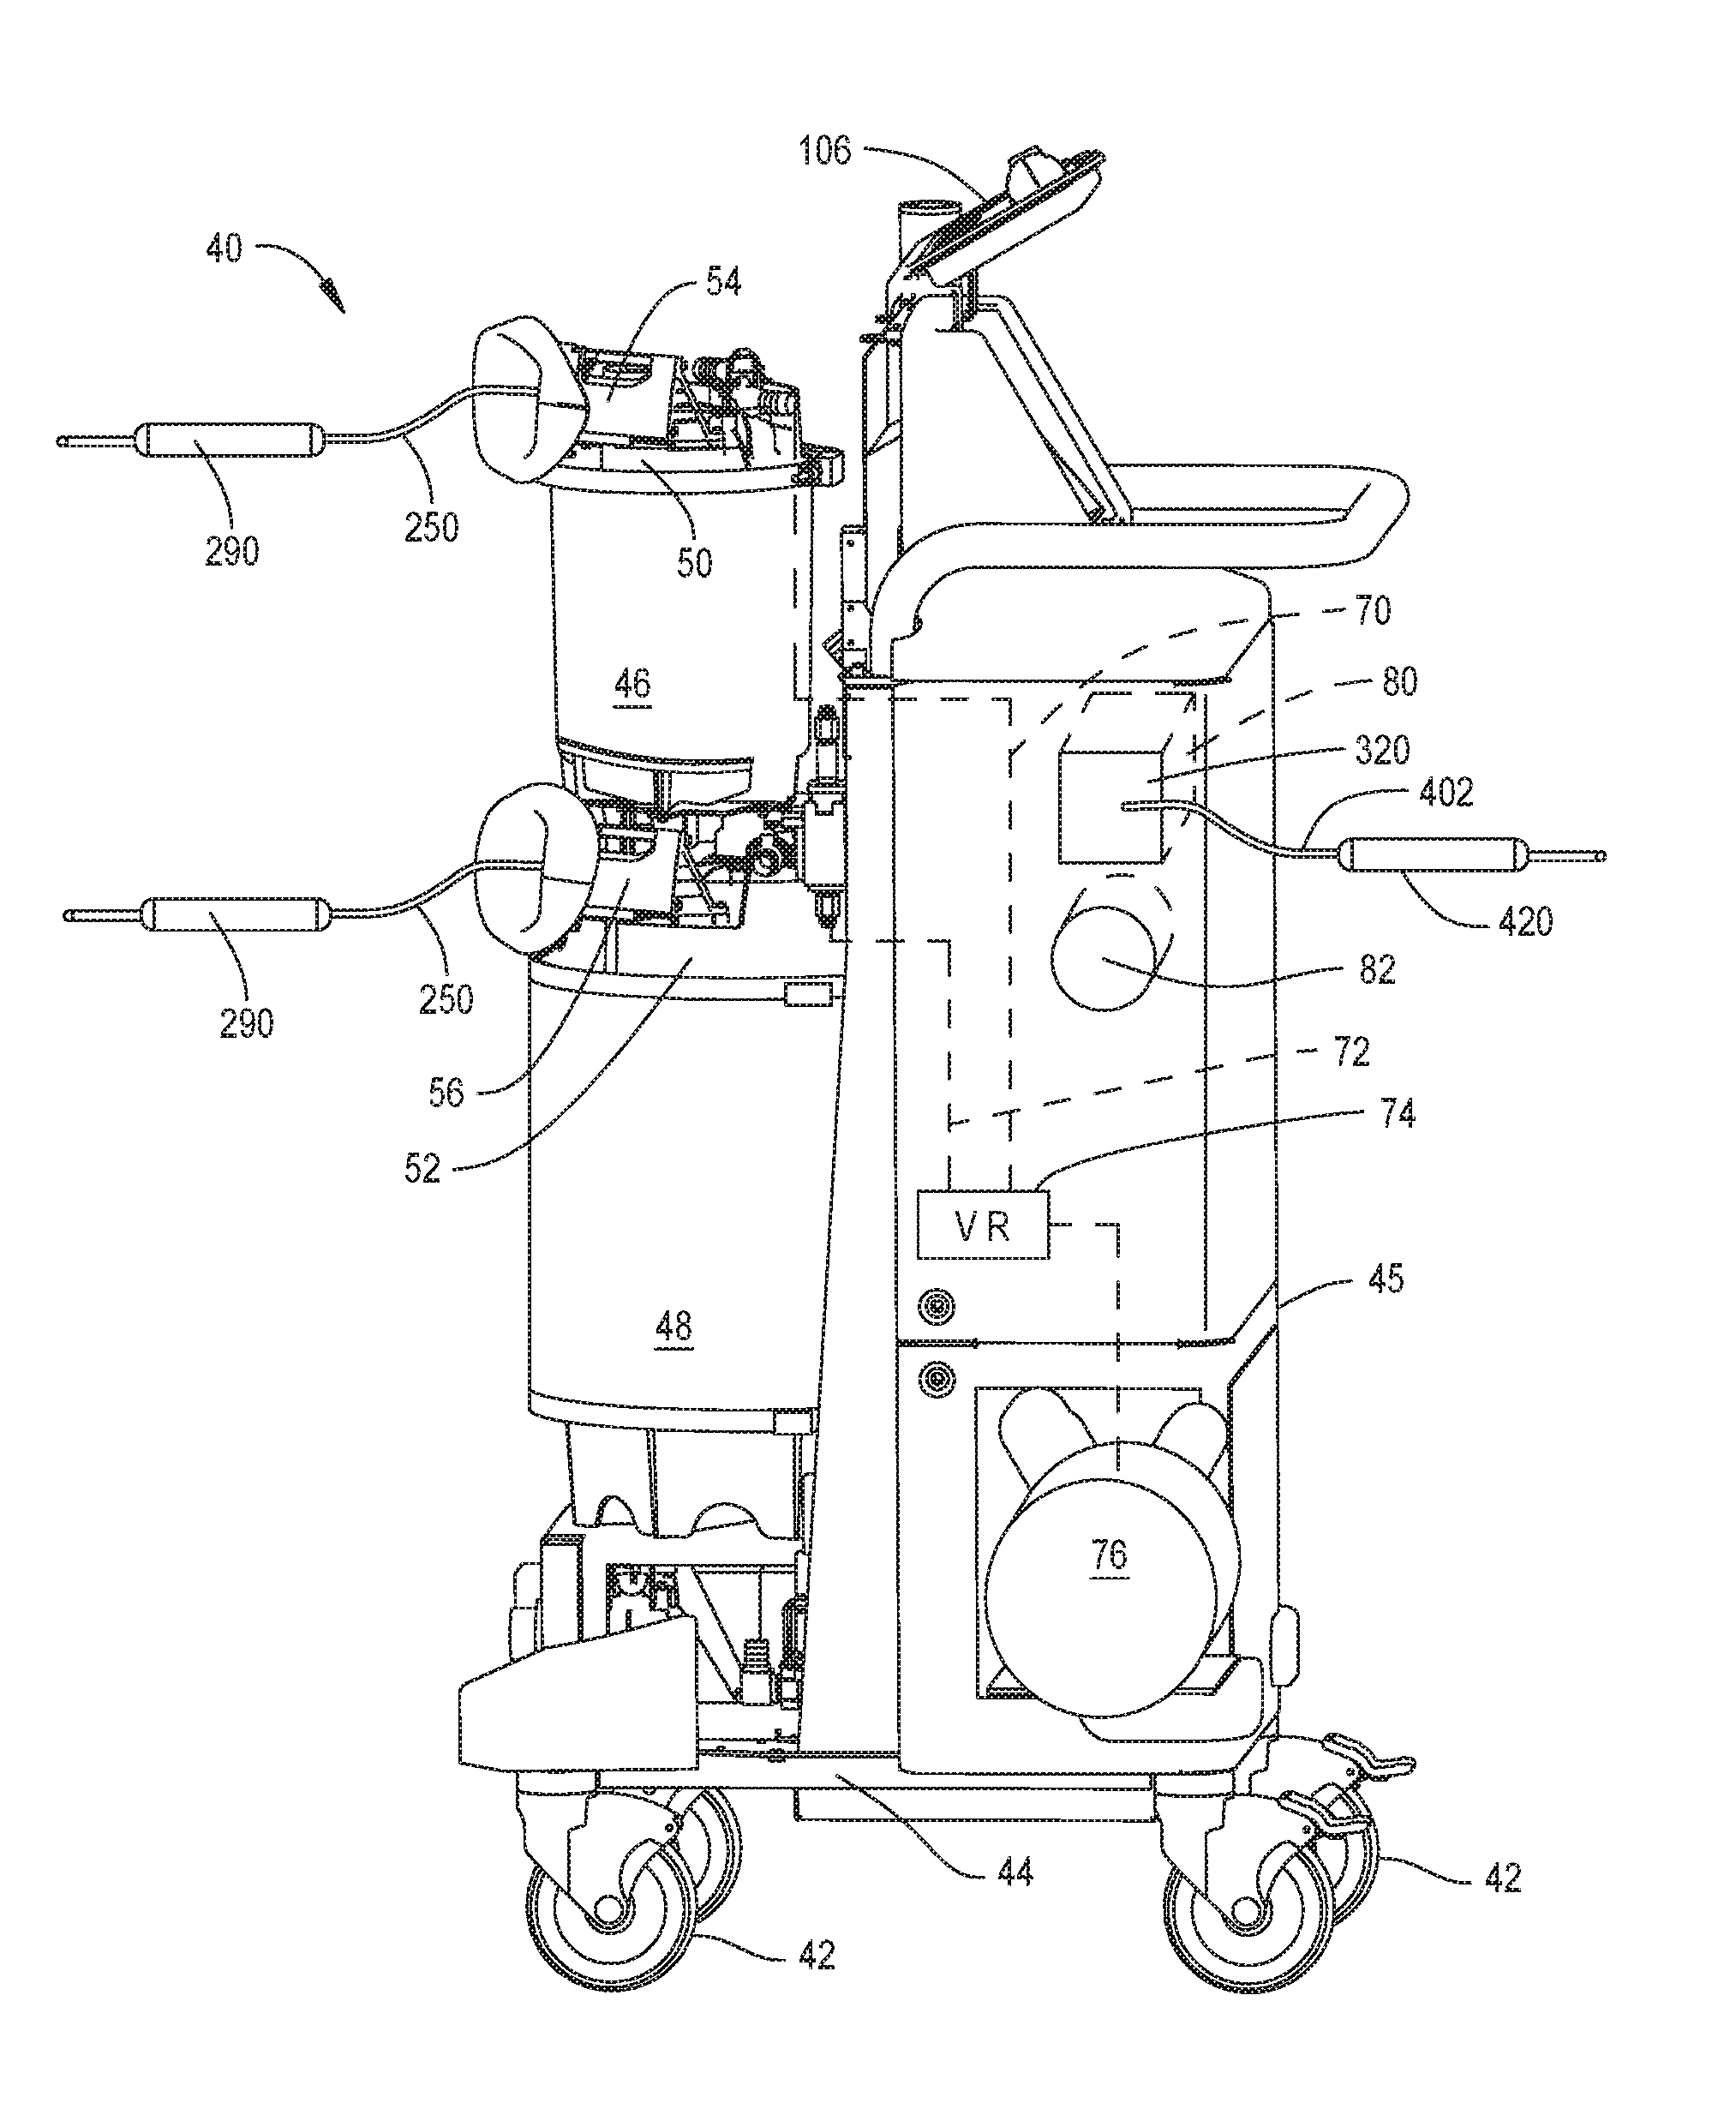 Medical/surgical waste collection unit with a light assembly separate from the primary display, the light assembly presenting information about the operation of the system by selectively outputting light